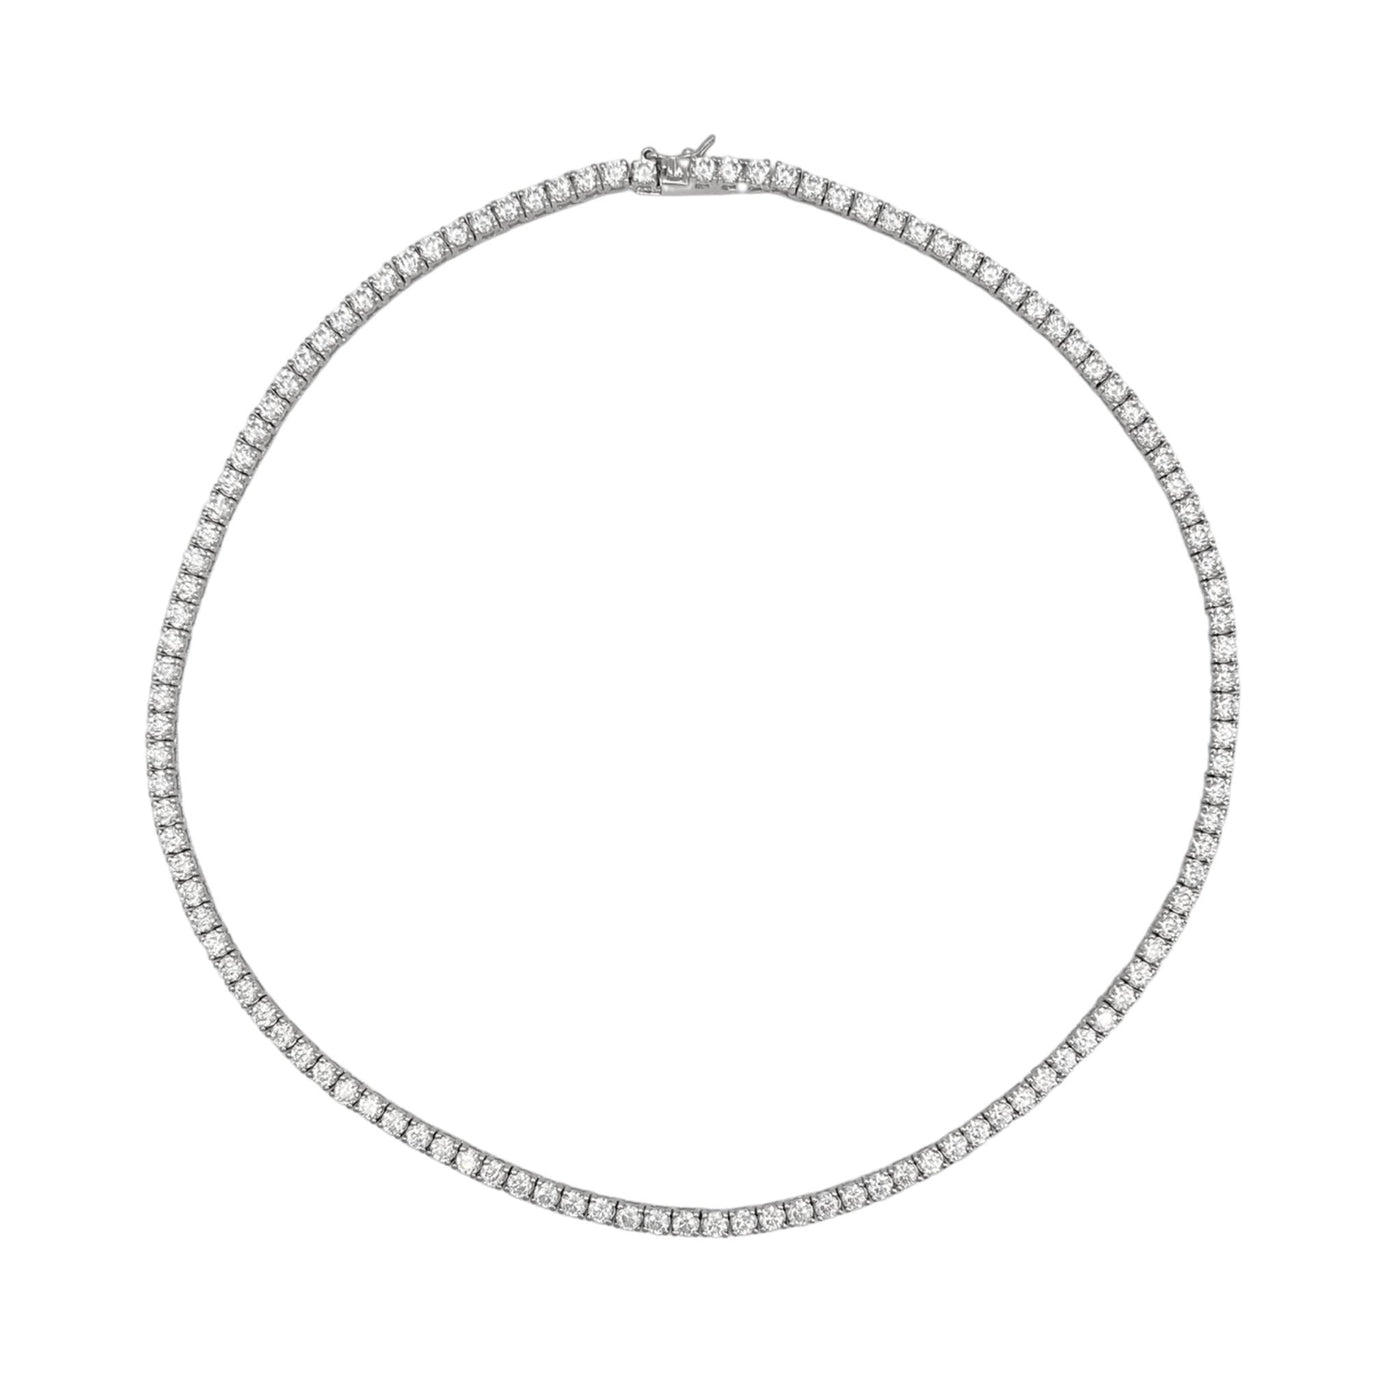 Silver casting tennis necklace with round white stones - 3 mm